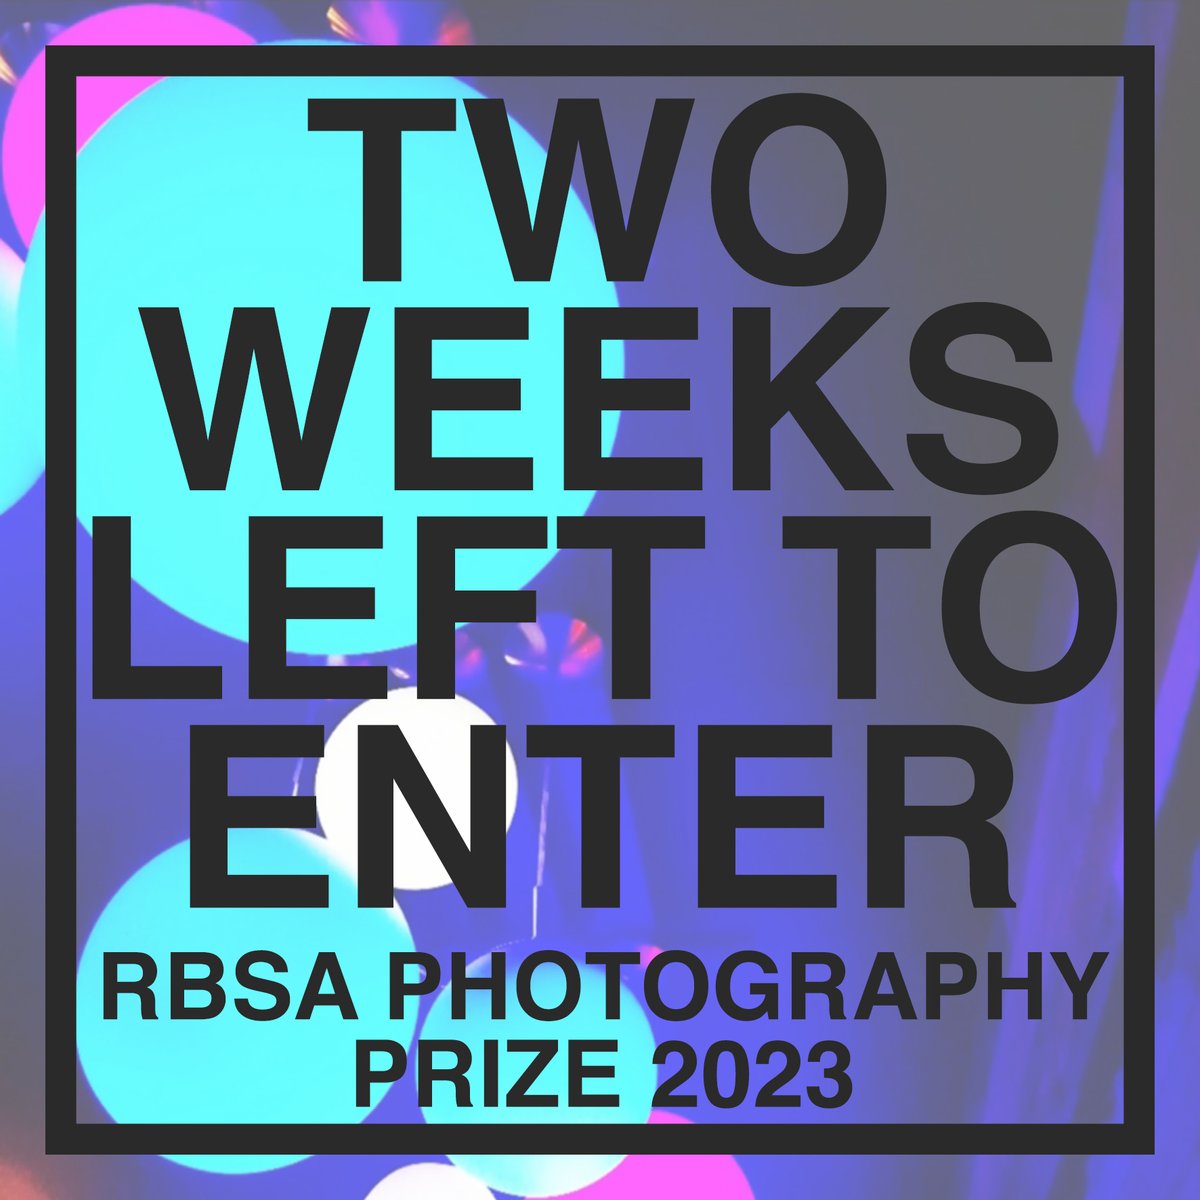 Two weeks left to enter! Visit rbsa.org.uk/call-for-entri… to enter no matter your experience #callforartists #photography 
@ArtistOpenCalls @Call4ArtistsUK @callforartists @Call_for_Artist @callsforart @callforentries @The_RPS @kclphotosoc @royal_wales